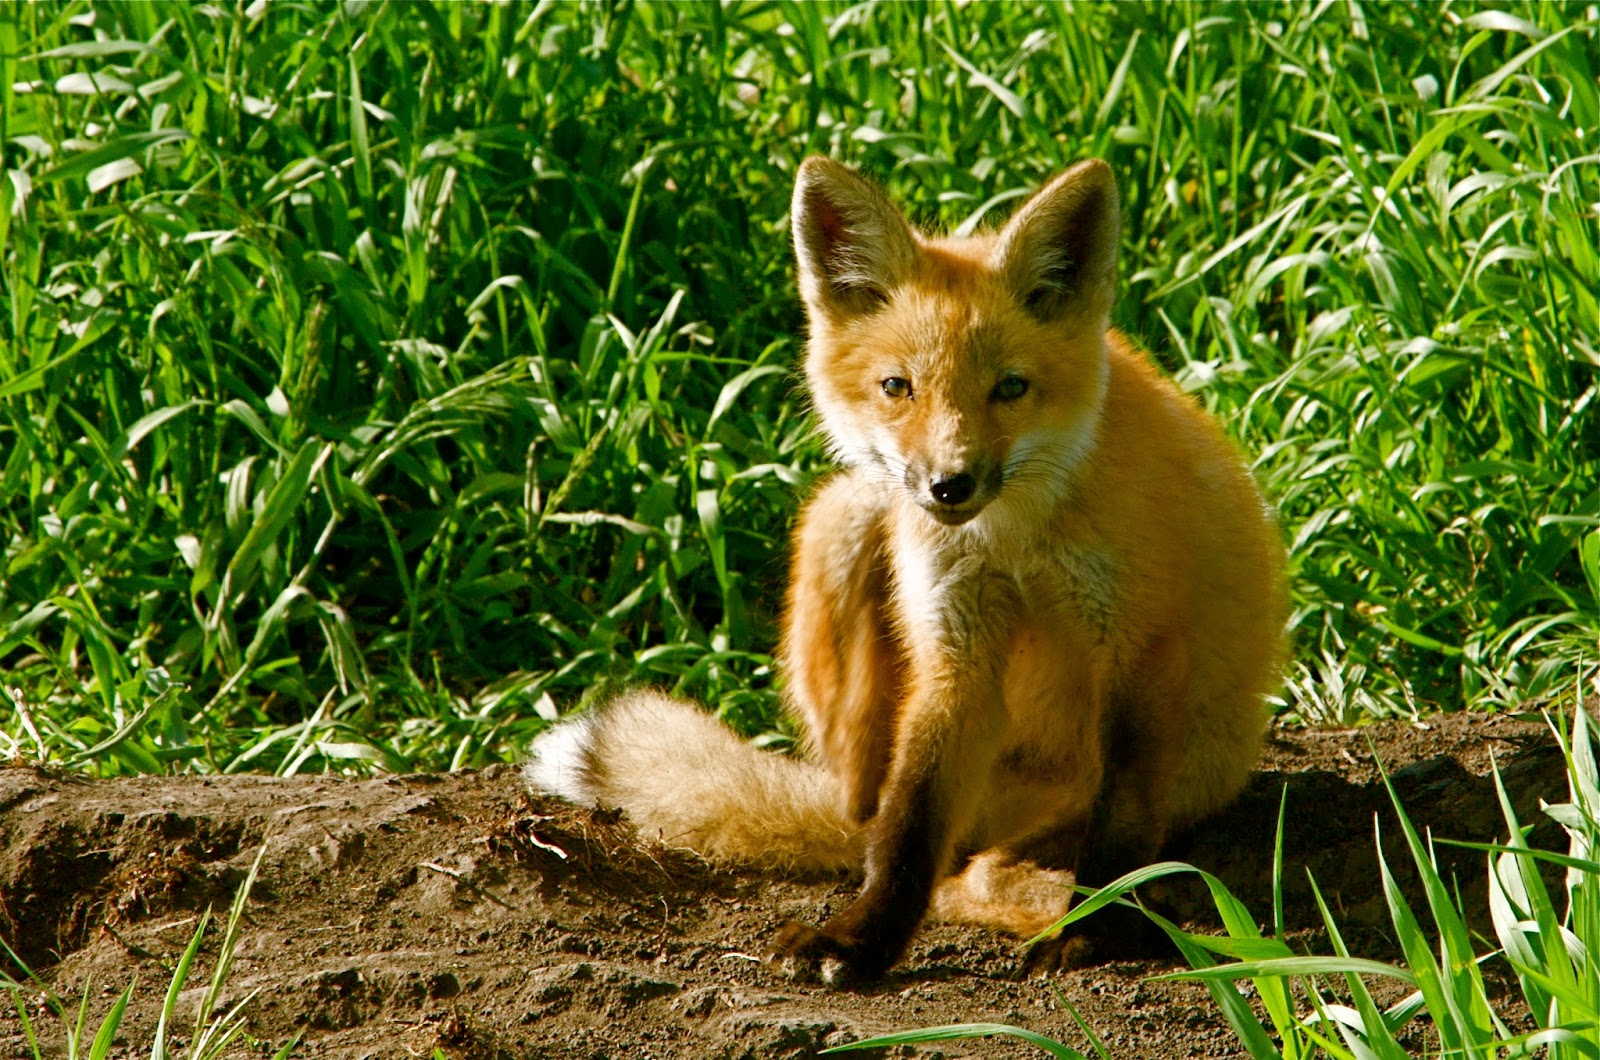 Itchy Red Fox pup